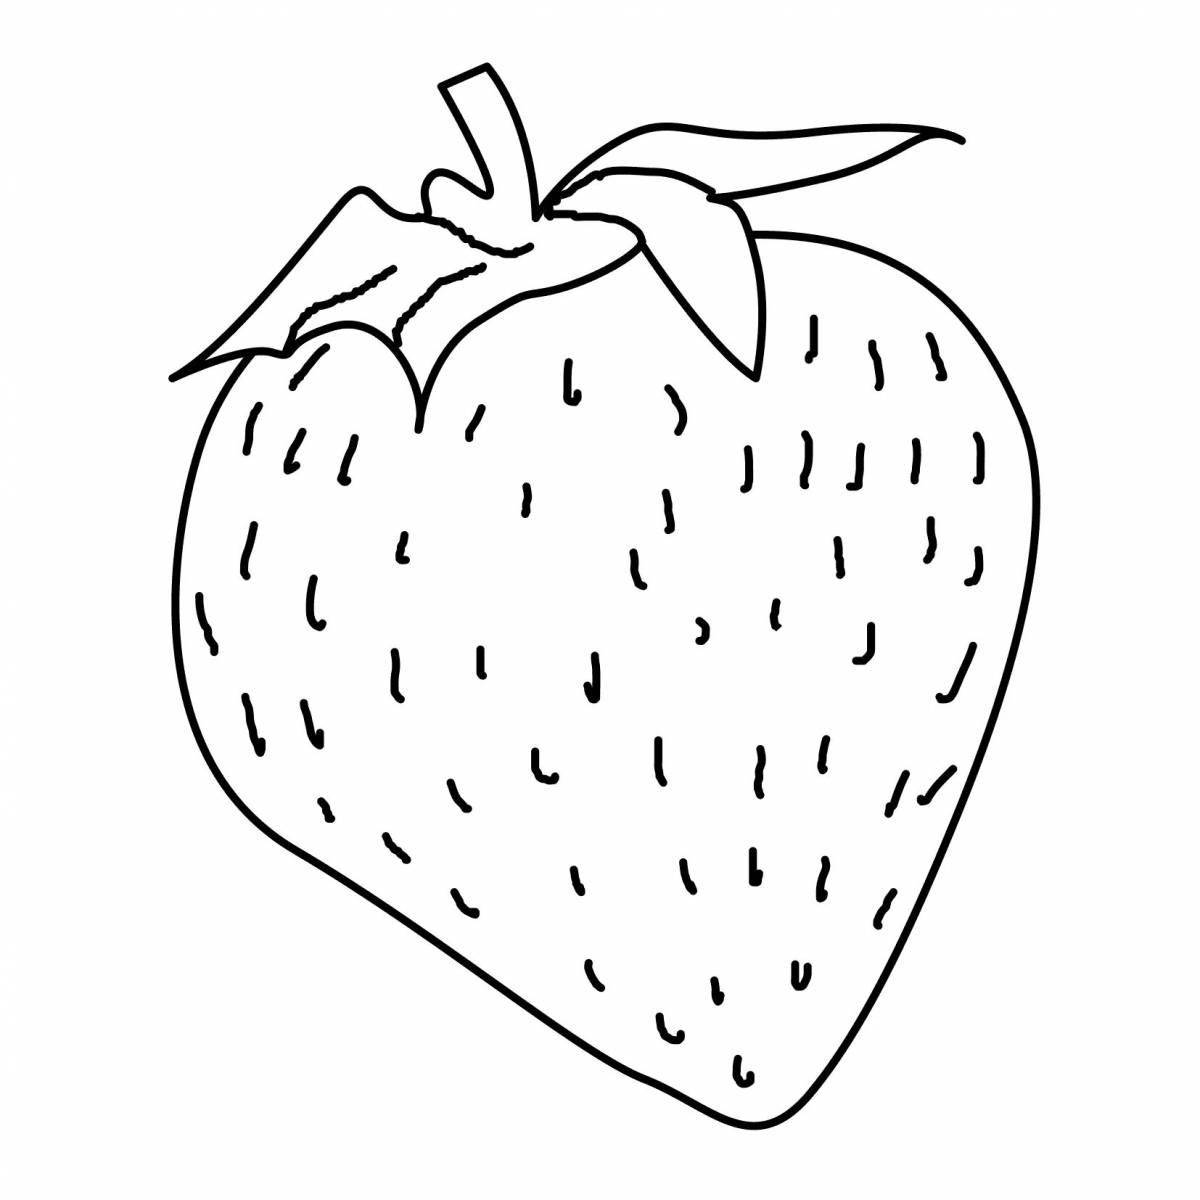 Colored strawberry coloring book